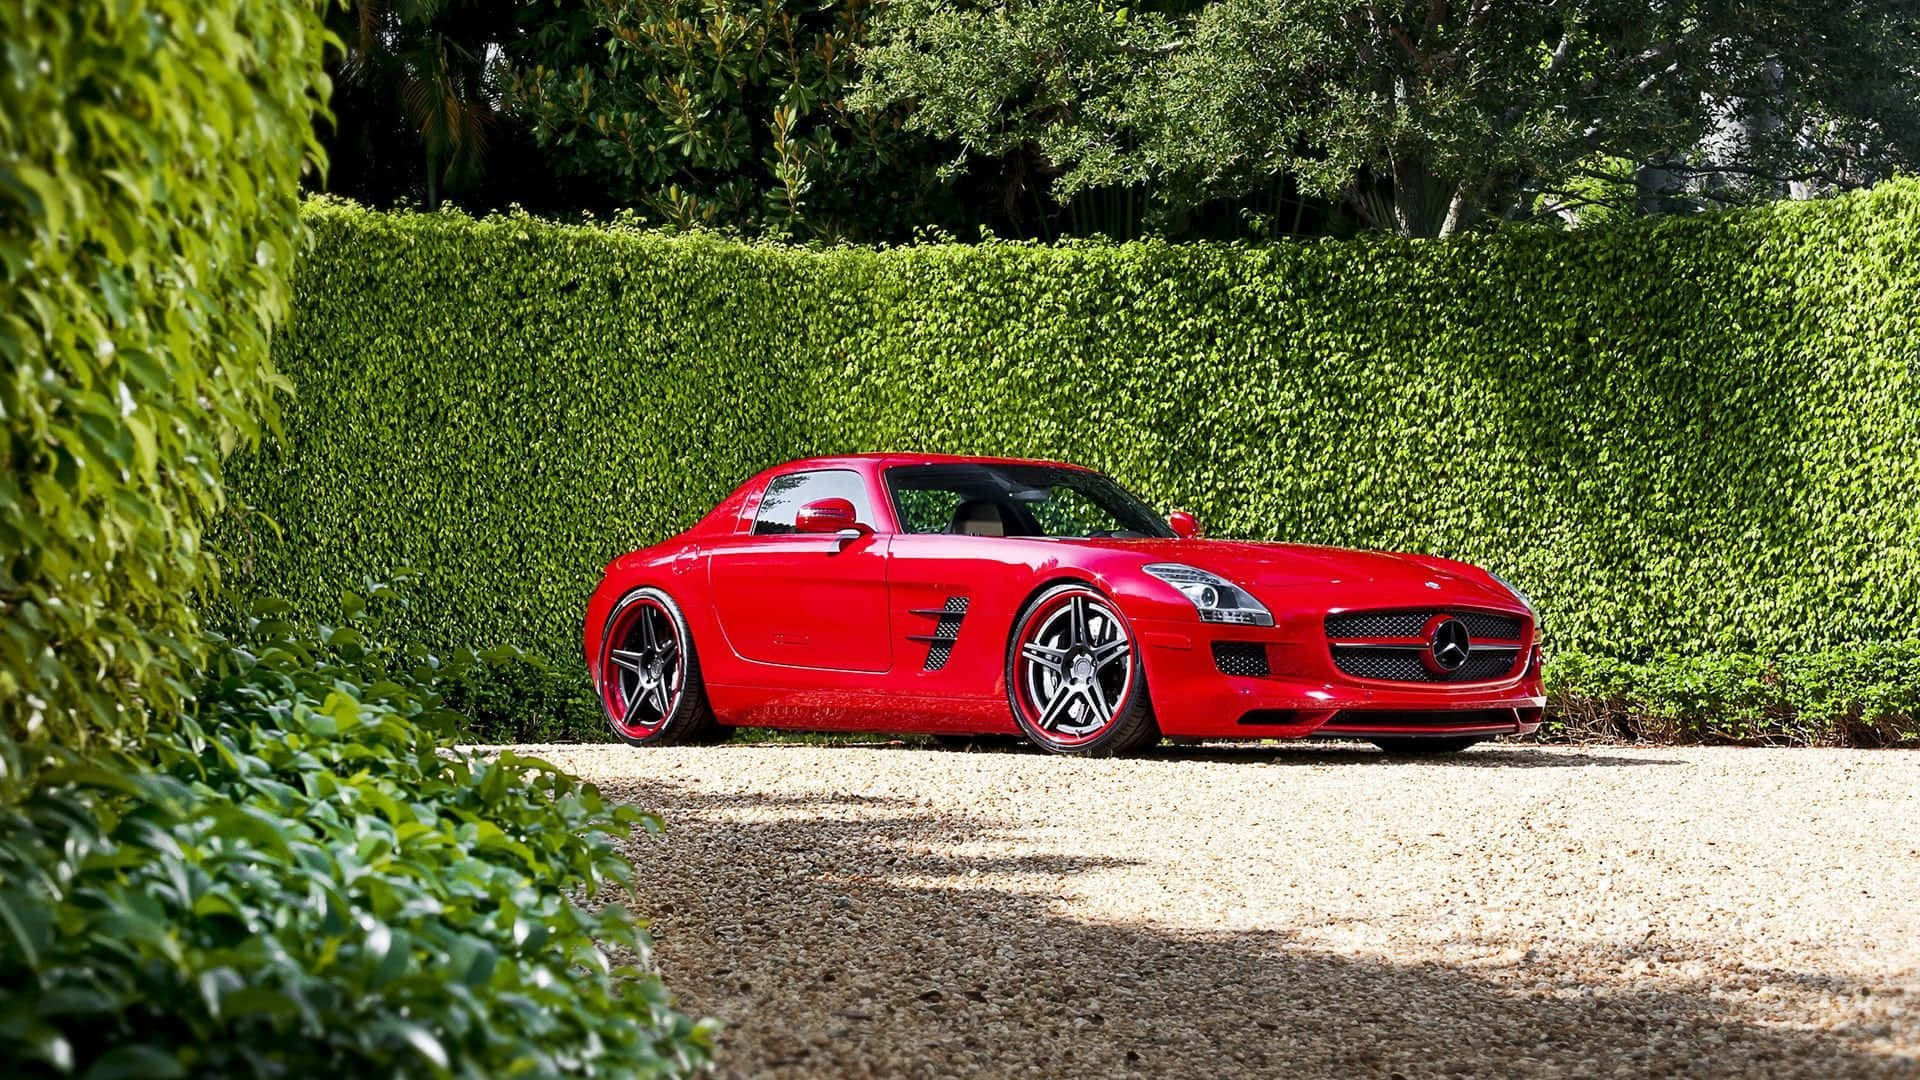 Experience the Luxury of a Mercedes Benz Wallpaper